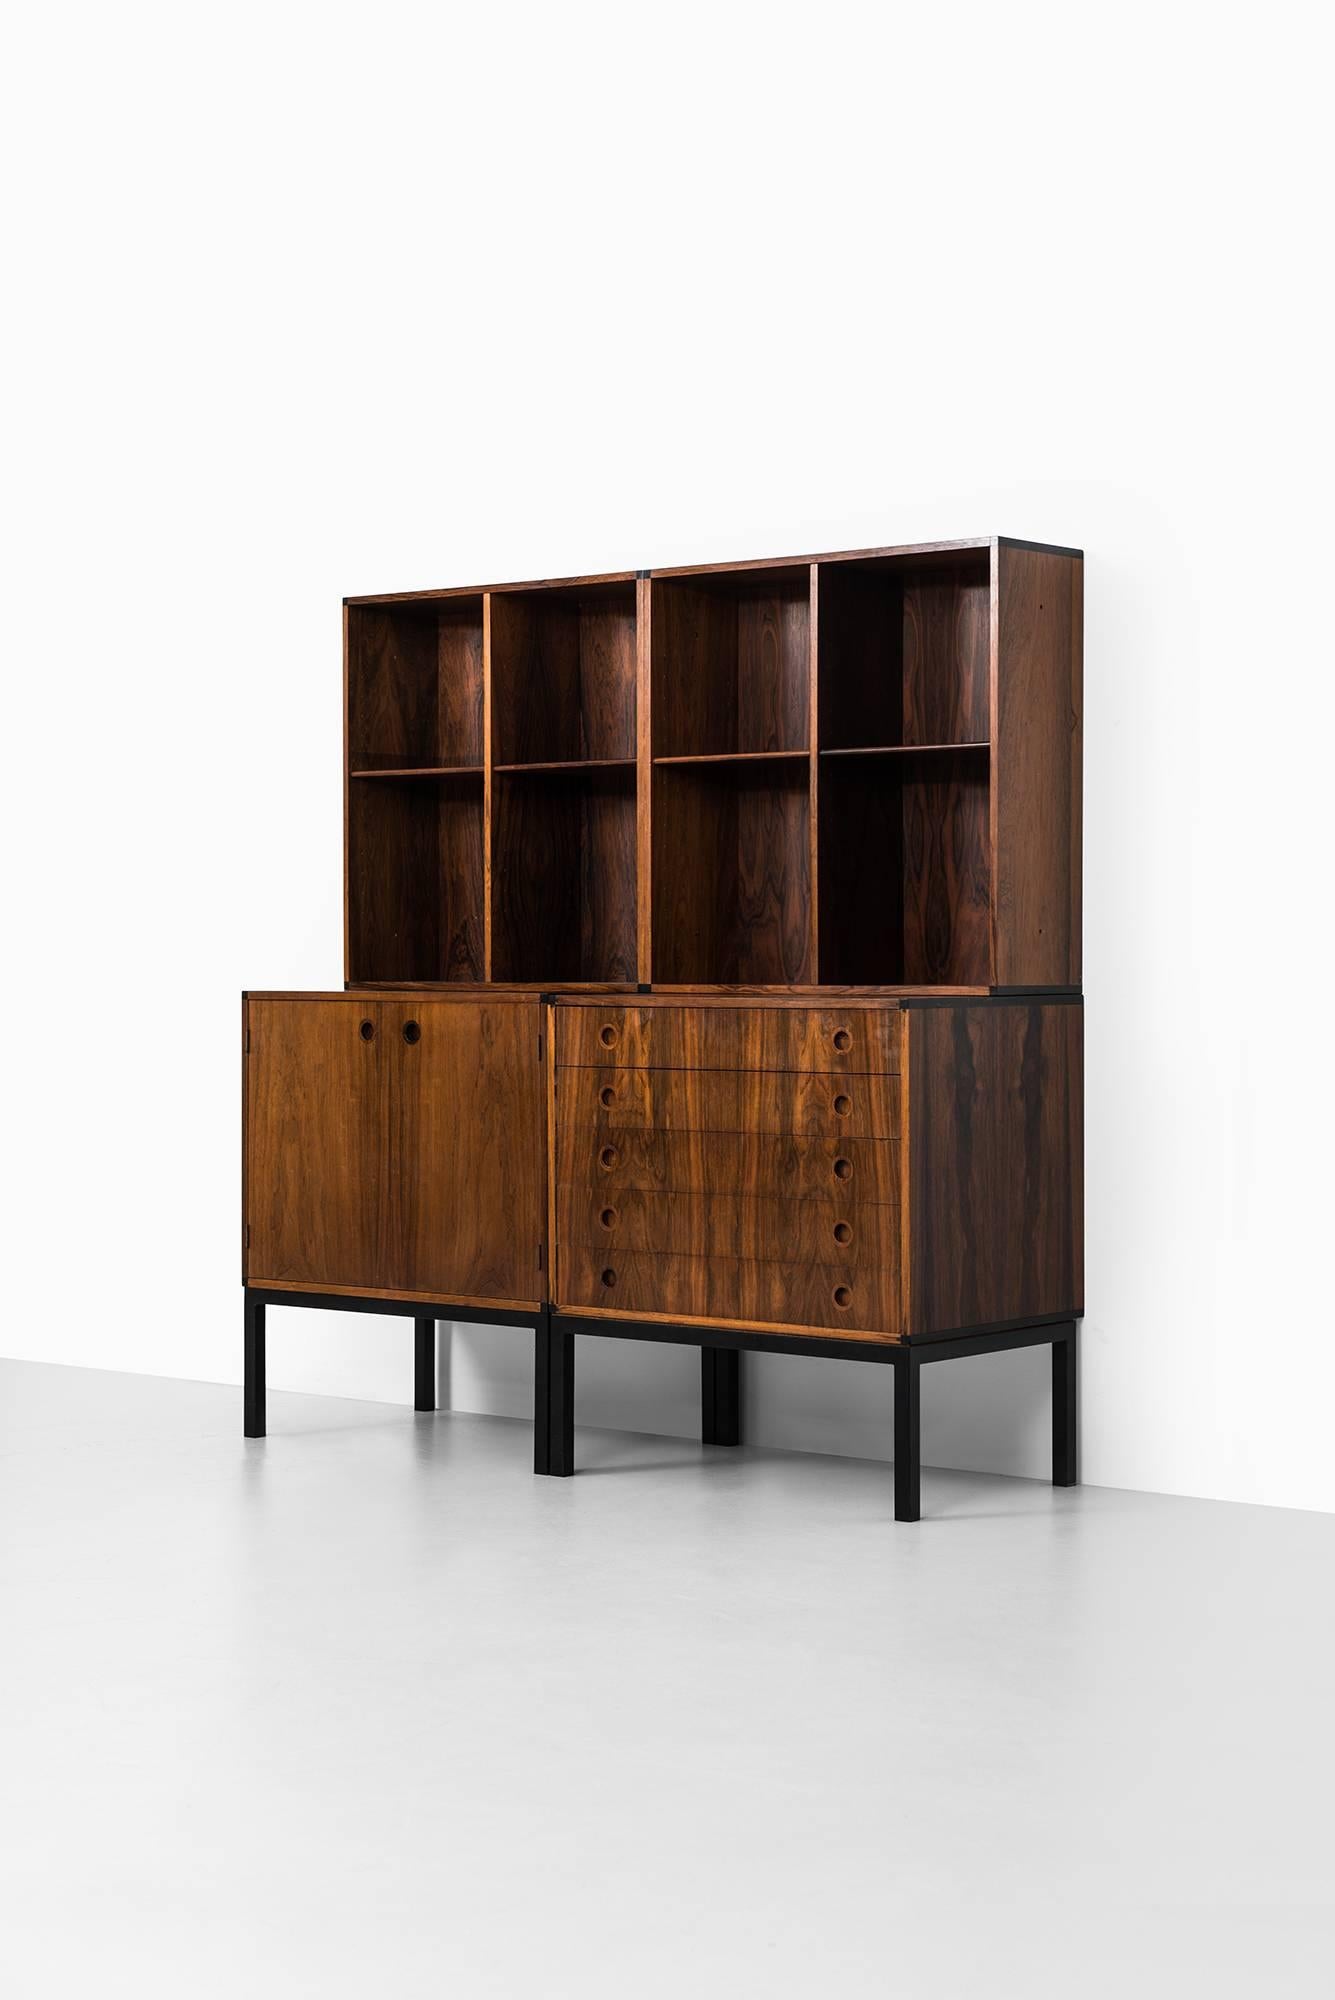 Storage unit designed by Hans Hove & Palle Petersen. Produced by Christian Linneberg in Denmark.

Dimensions cabinet (W x D x H): 64 x 44 x 70 cm
Dimensions bookcase (W x D x H): 64 x 22 x 64 cm.